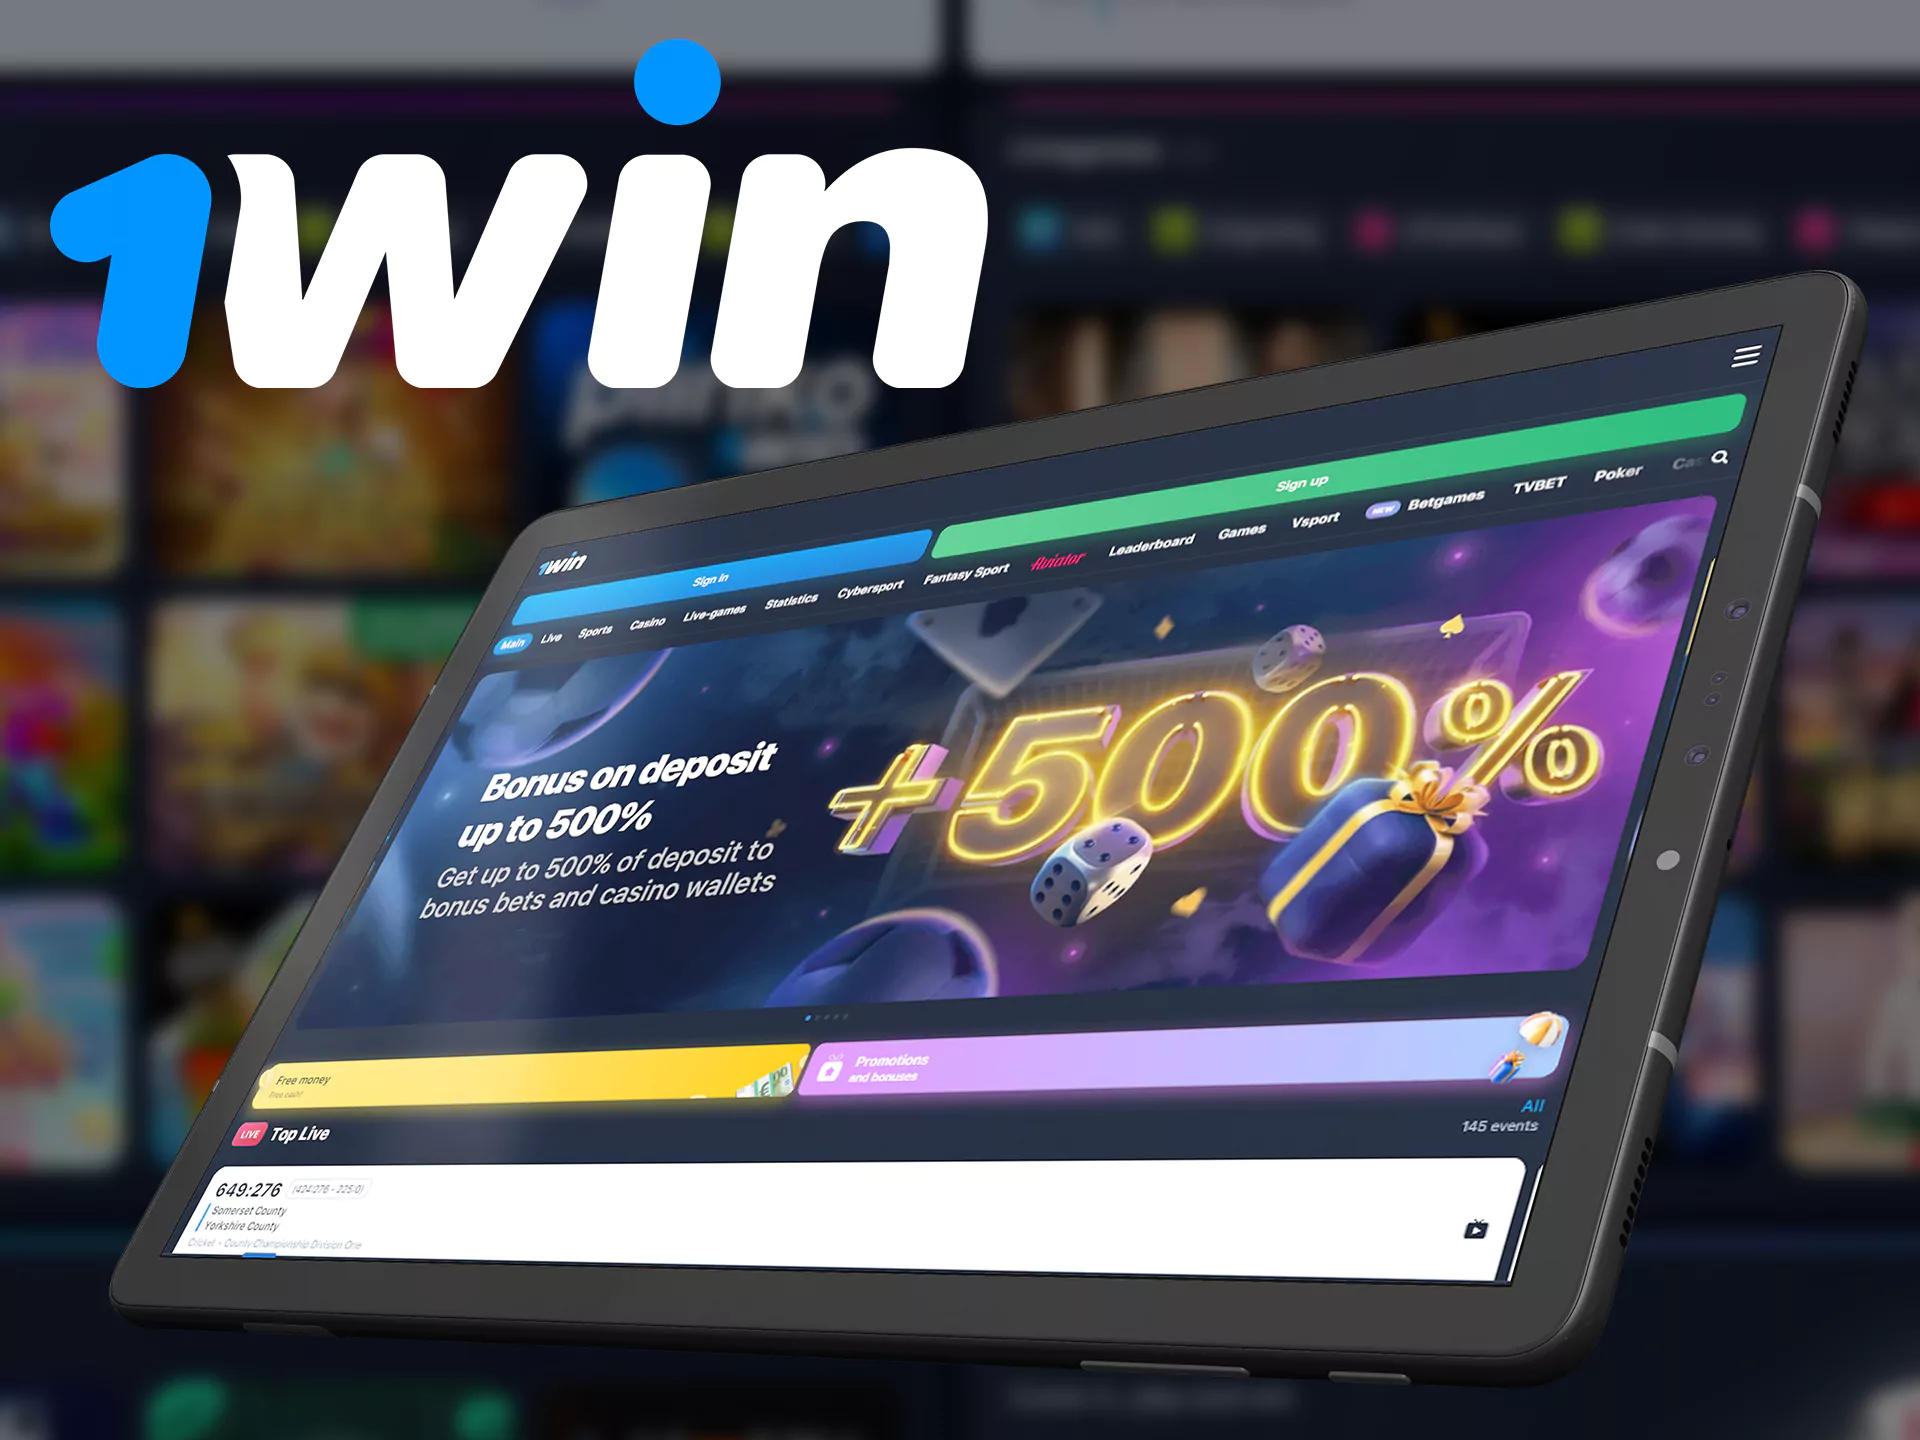 You can use 1win website on any device with browser.